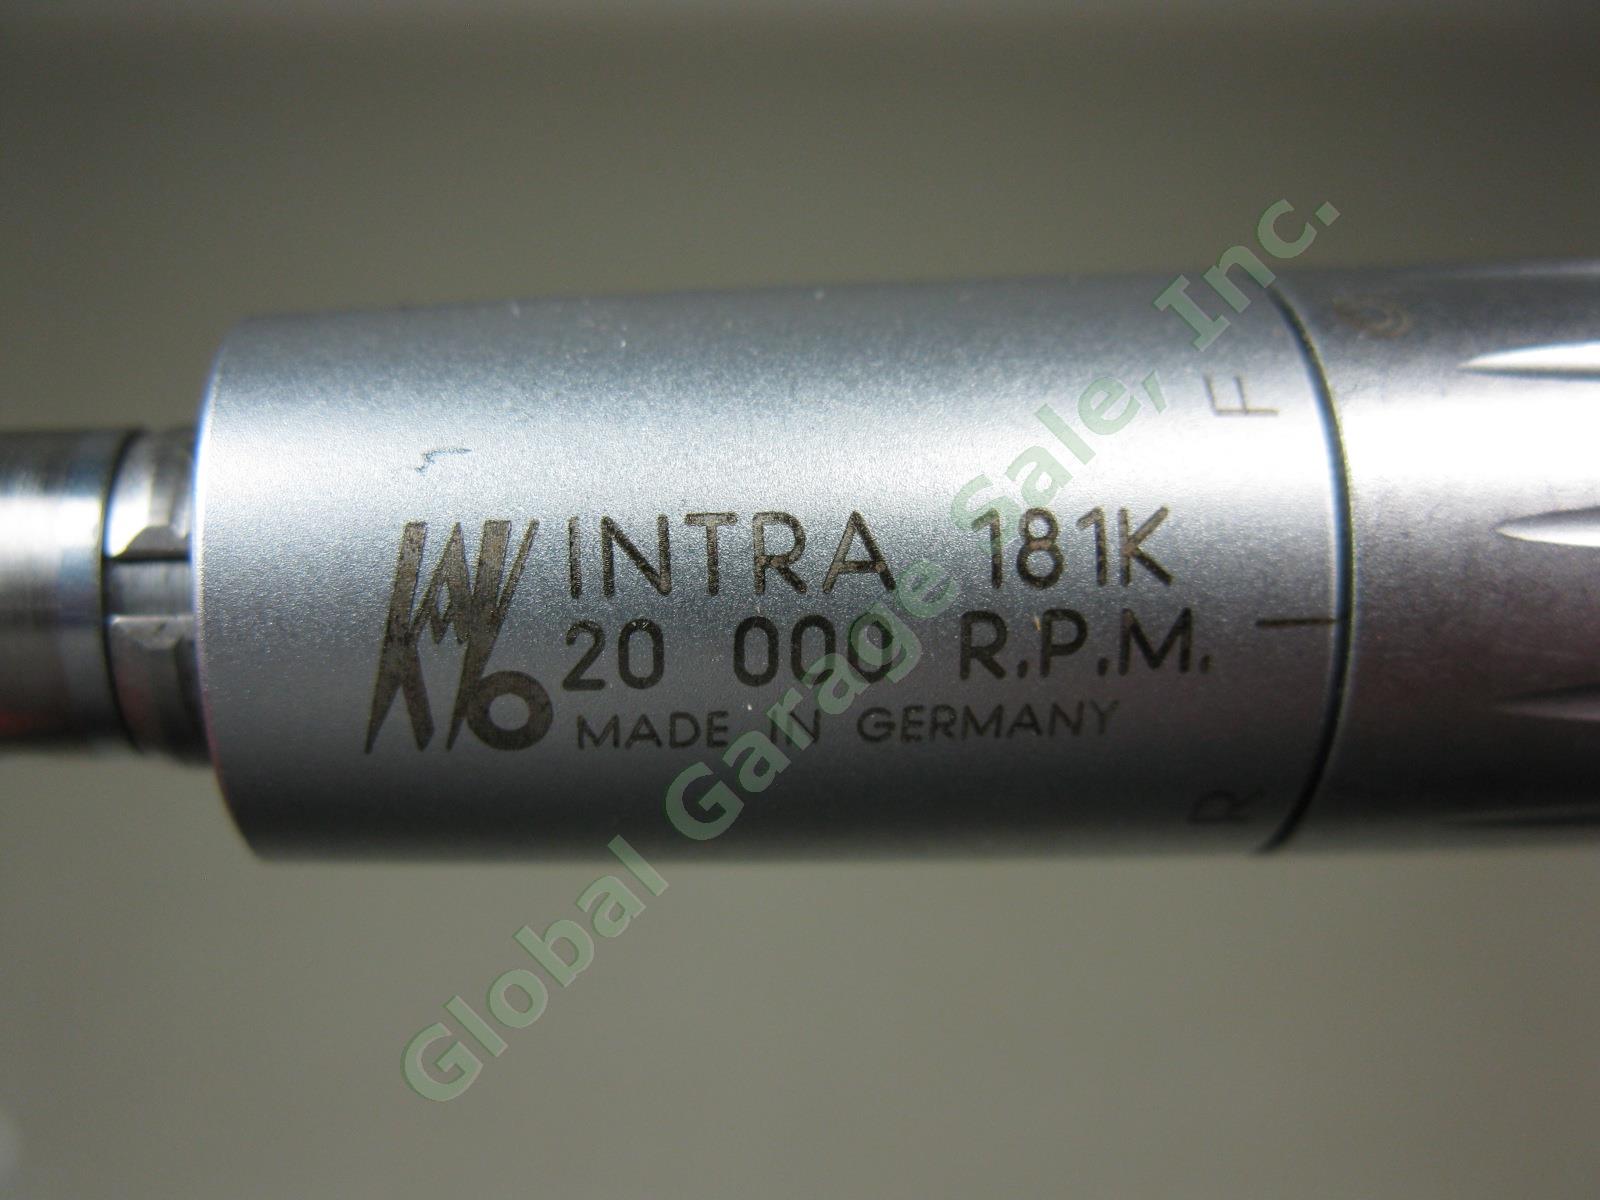 Kavo Intra 181K 20K RPM Low Speed Dental Handpiece Motor +Whaledent Contra Angle 5